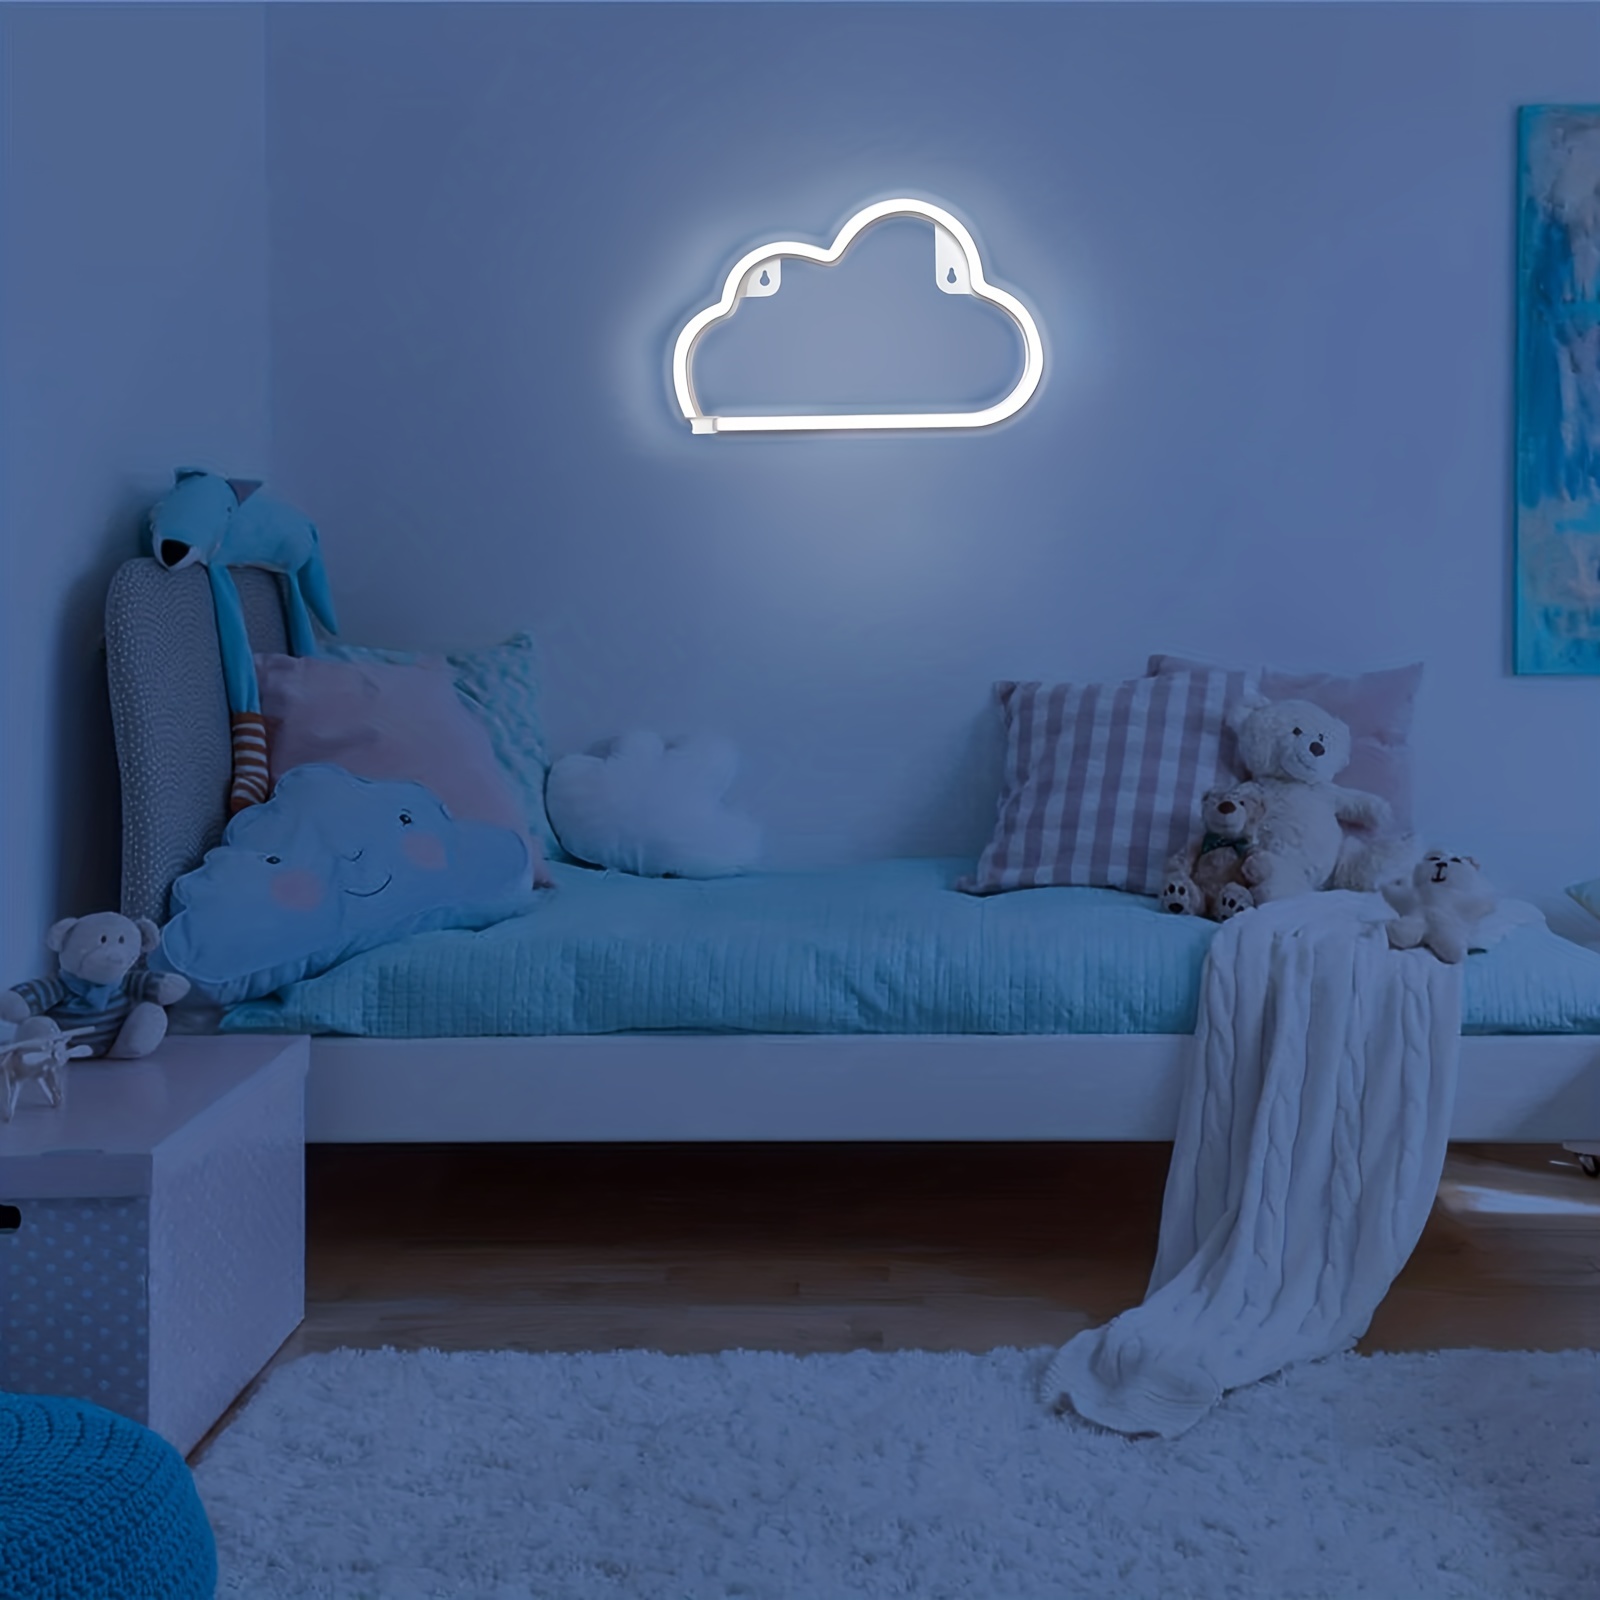 1pc Cloud Shaped Led Neon Sign Led Light Wall Decor Battery Usb Powered  Decoration Wall Lights Bedroom Teens Girls Kids Room Christmas Halloween  Birthday Wedding Party Decor - Sports & Outdoors 